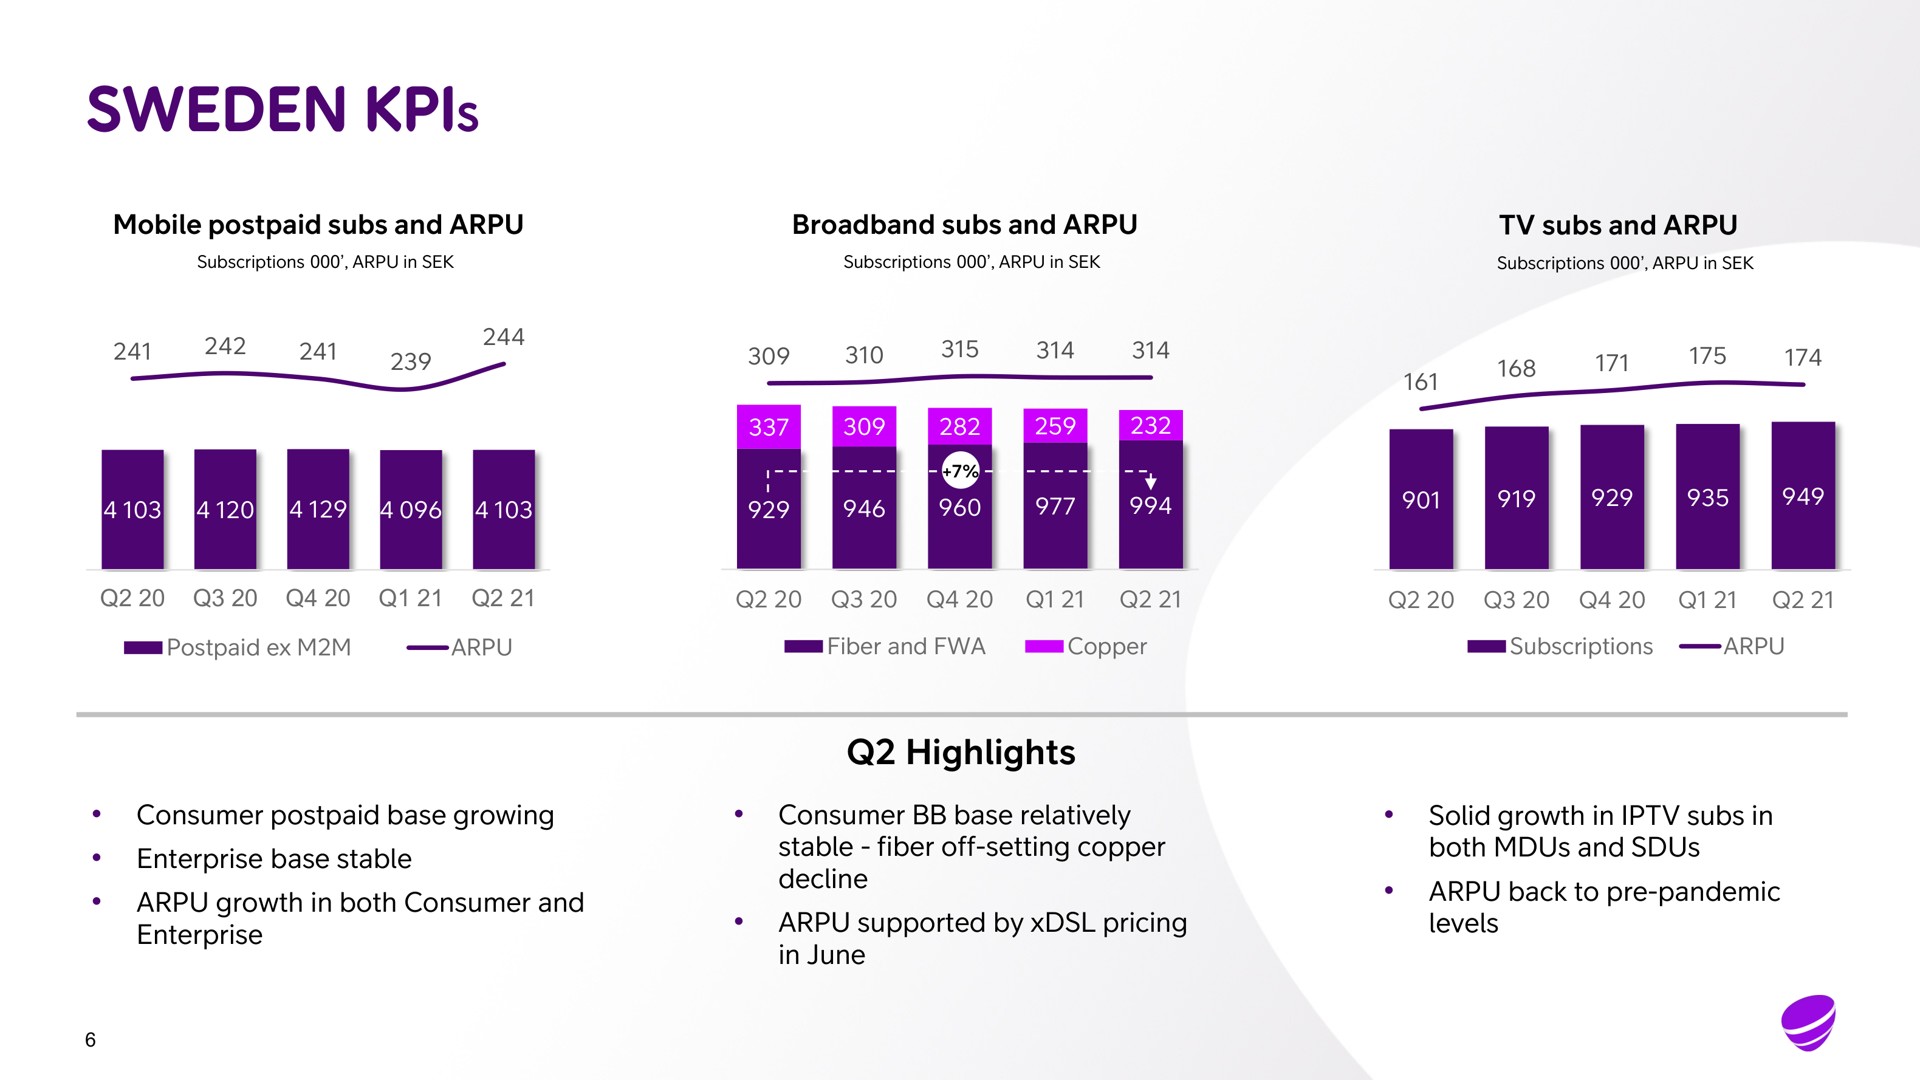 mobile postpaid subs and subs and subs and consumer postpaid base growing growth in both consumer and enterprise base stable enterprise highlights consumer base relatively stable fiber off setting copper decline supported by pricing in june solid growth in subs in both and back to pandemic levels a | Telia Company